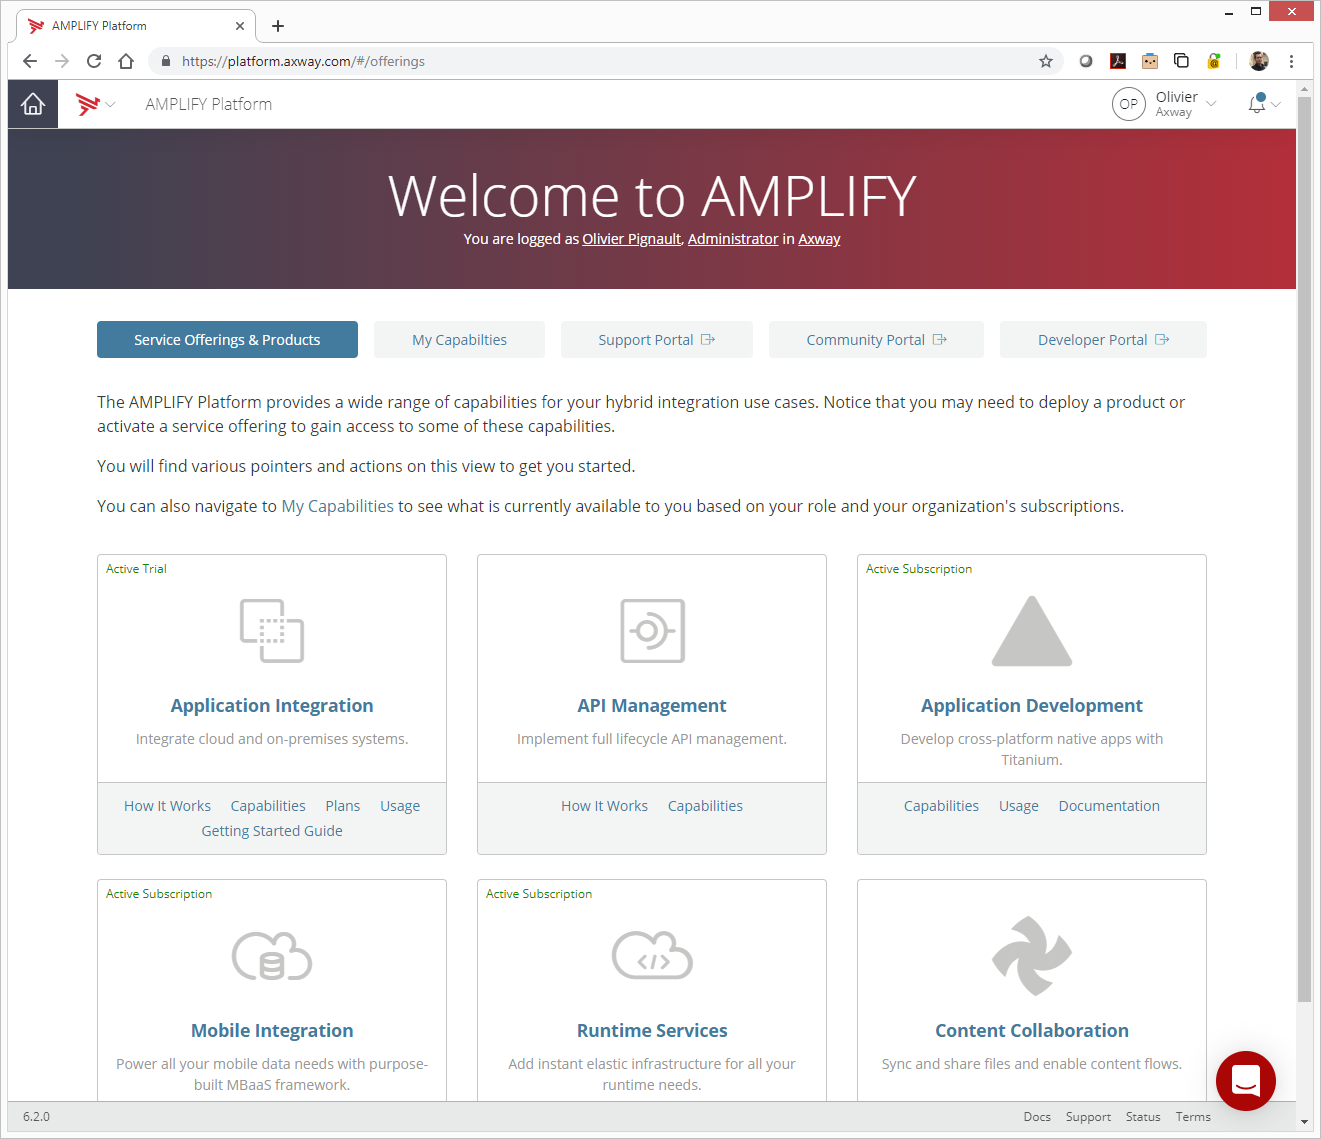 AMPLIFY Platform Home Page - Service Offerings and Products